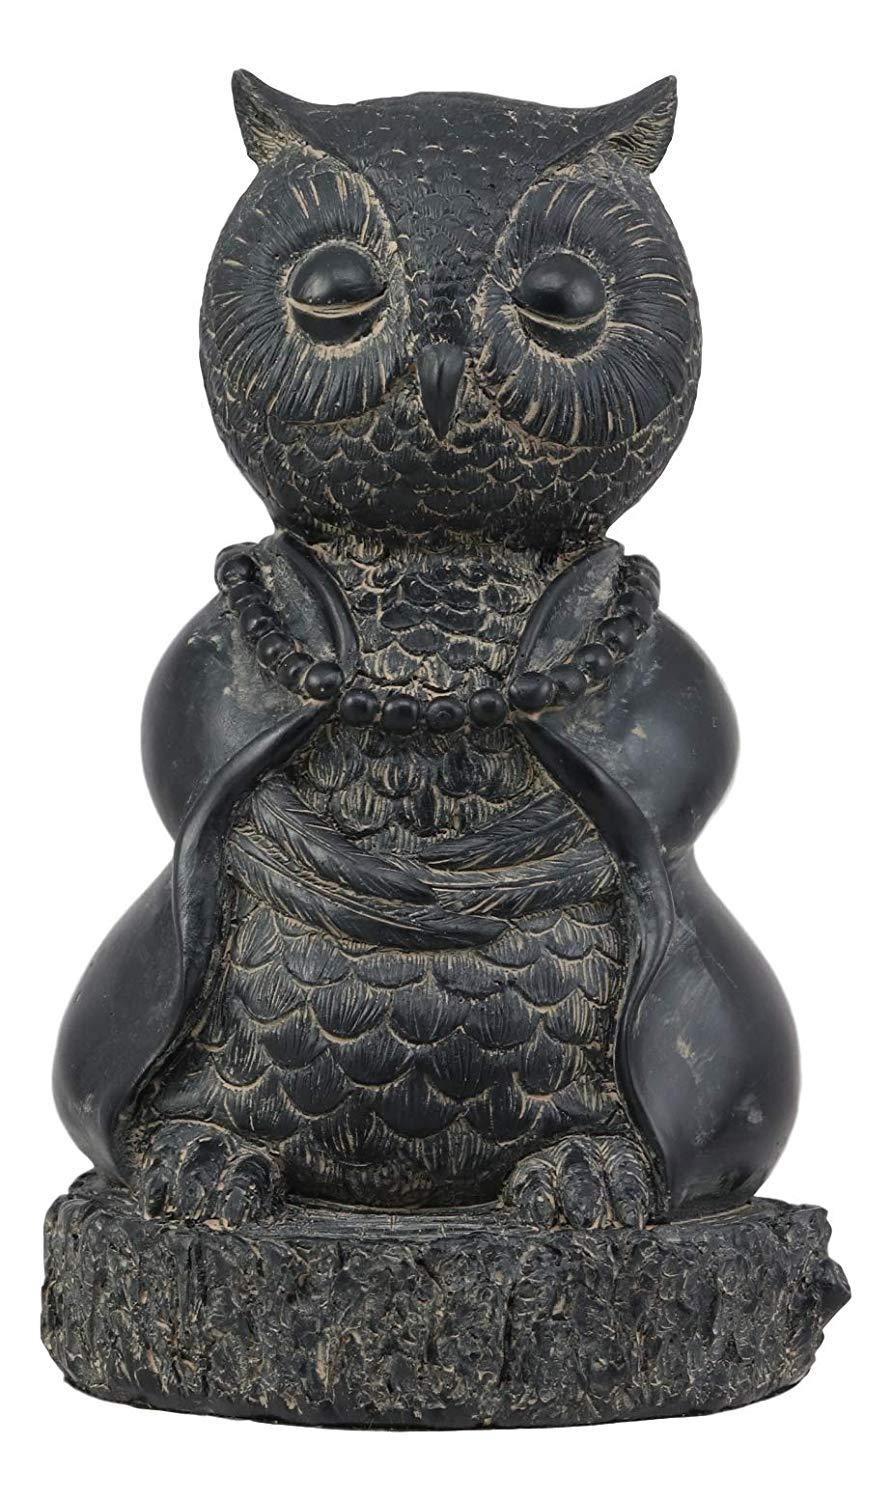 Ebros Gift Feng Shui Vastu Buddha Zen Yoga Owl with Prayer Beads Necklace Meditating Statue Decorative Talisman Figurine for Positive Flow and Harmony for Home or Office Decor 6